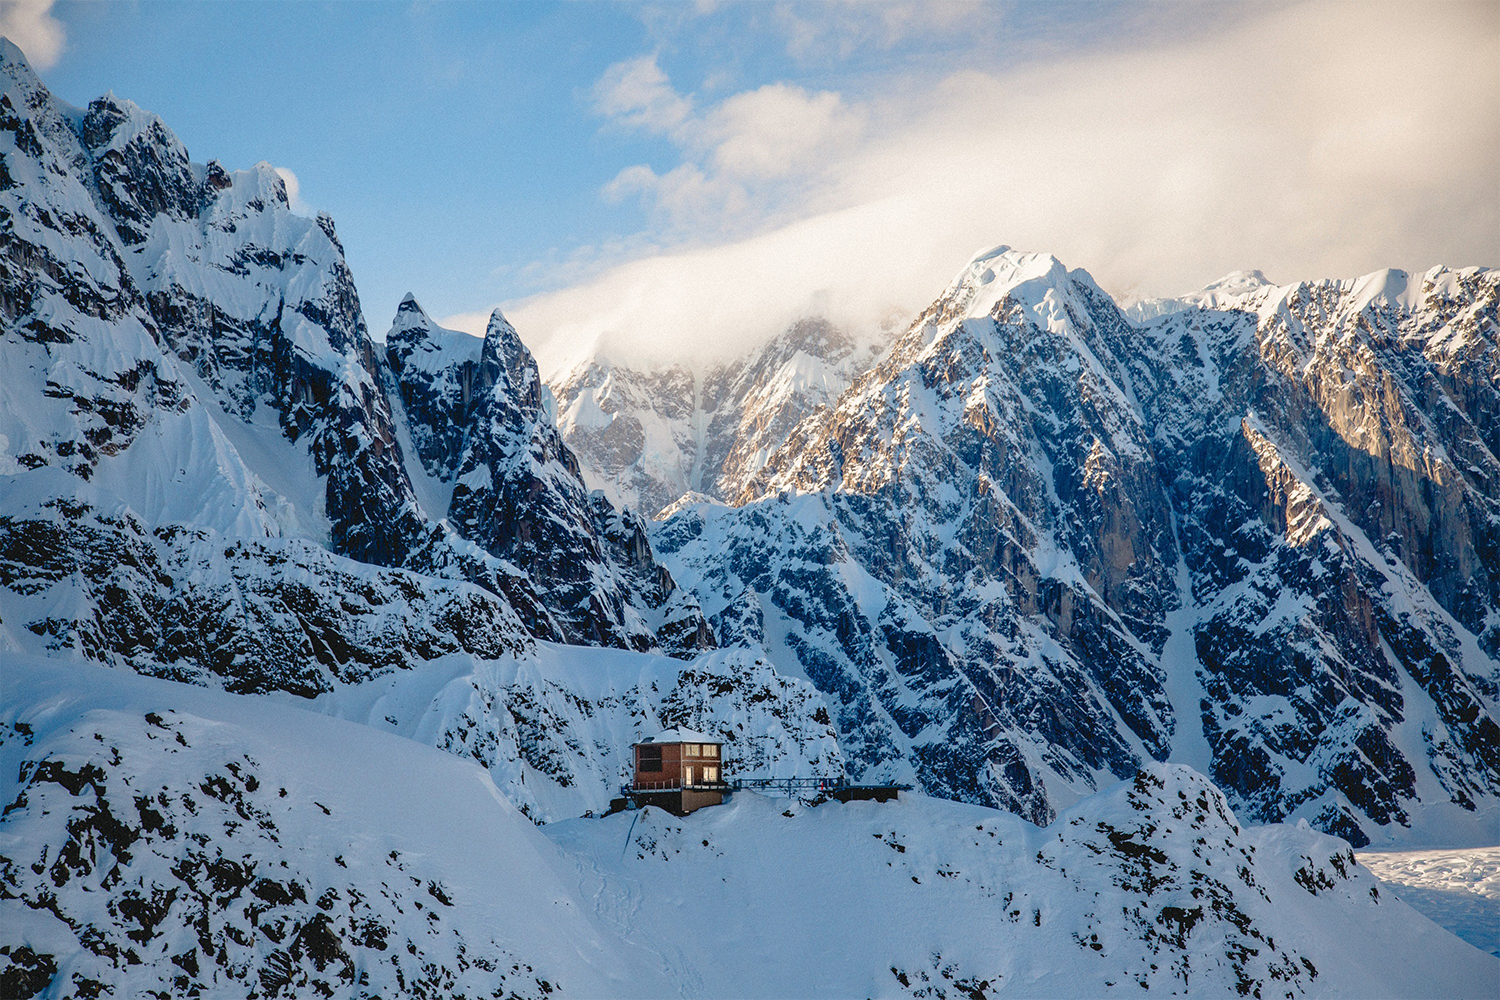 Sheldon Chalet, a remote, luxury destination in Alaska, pictured amongst the snow-capped mountains